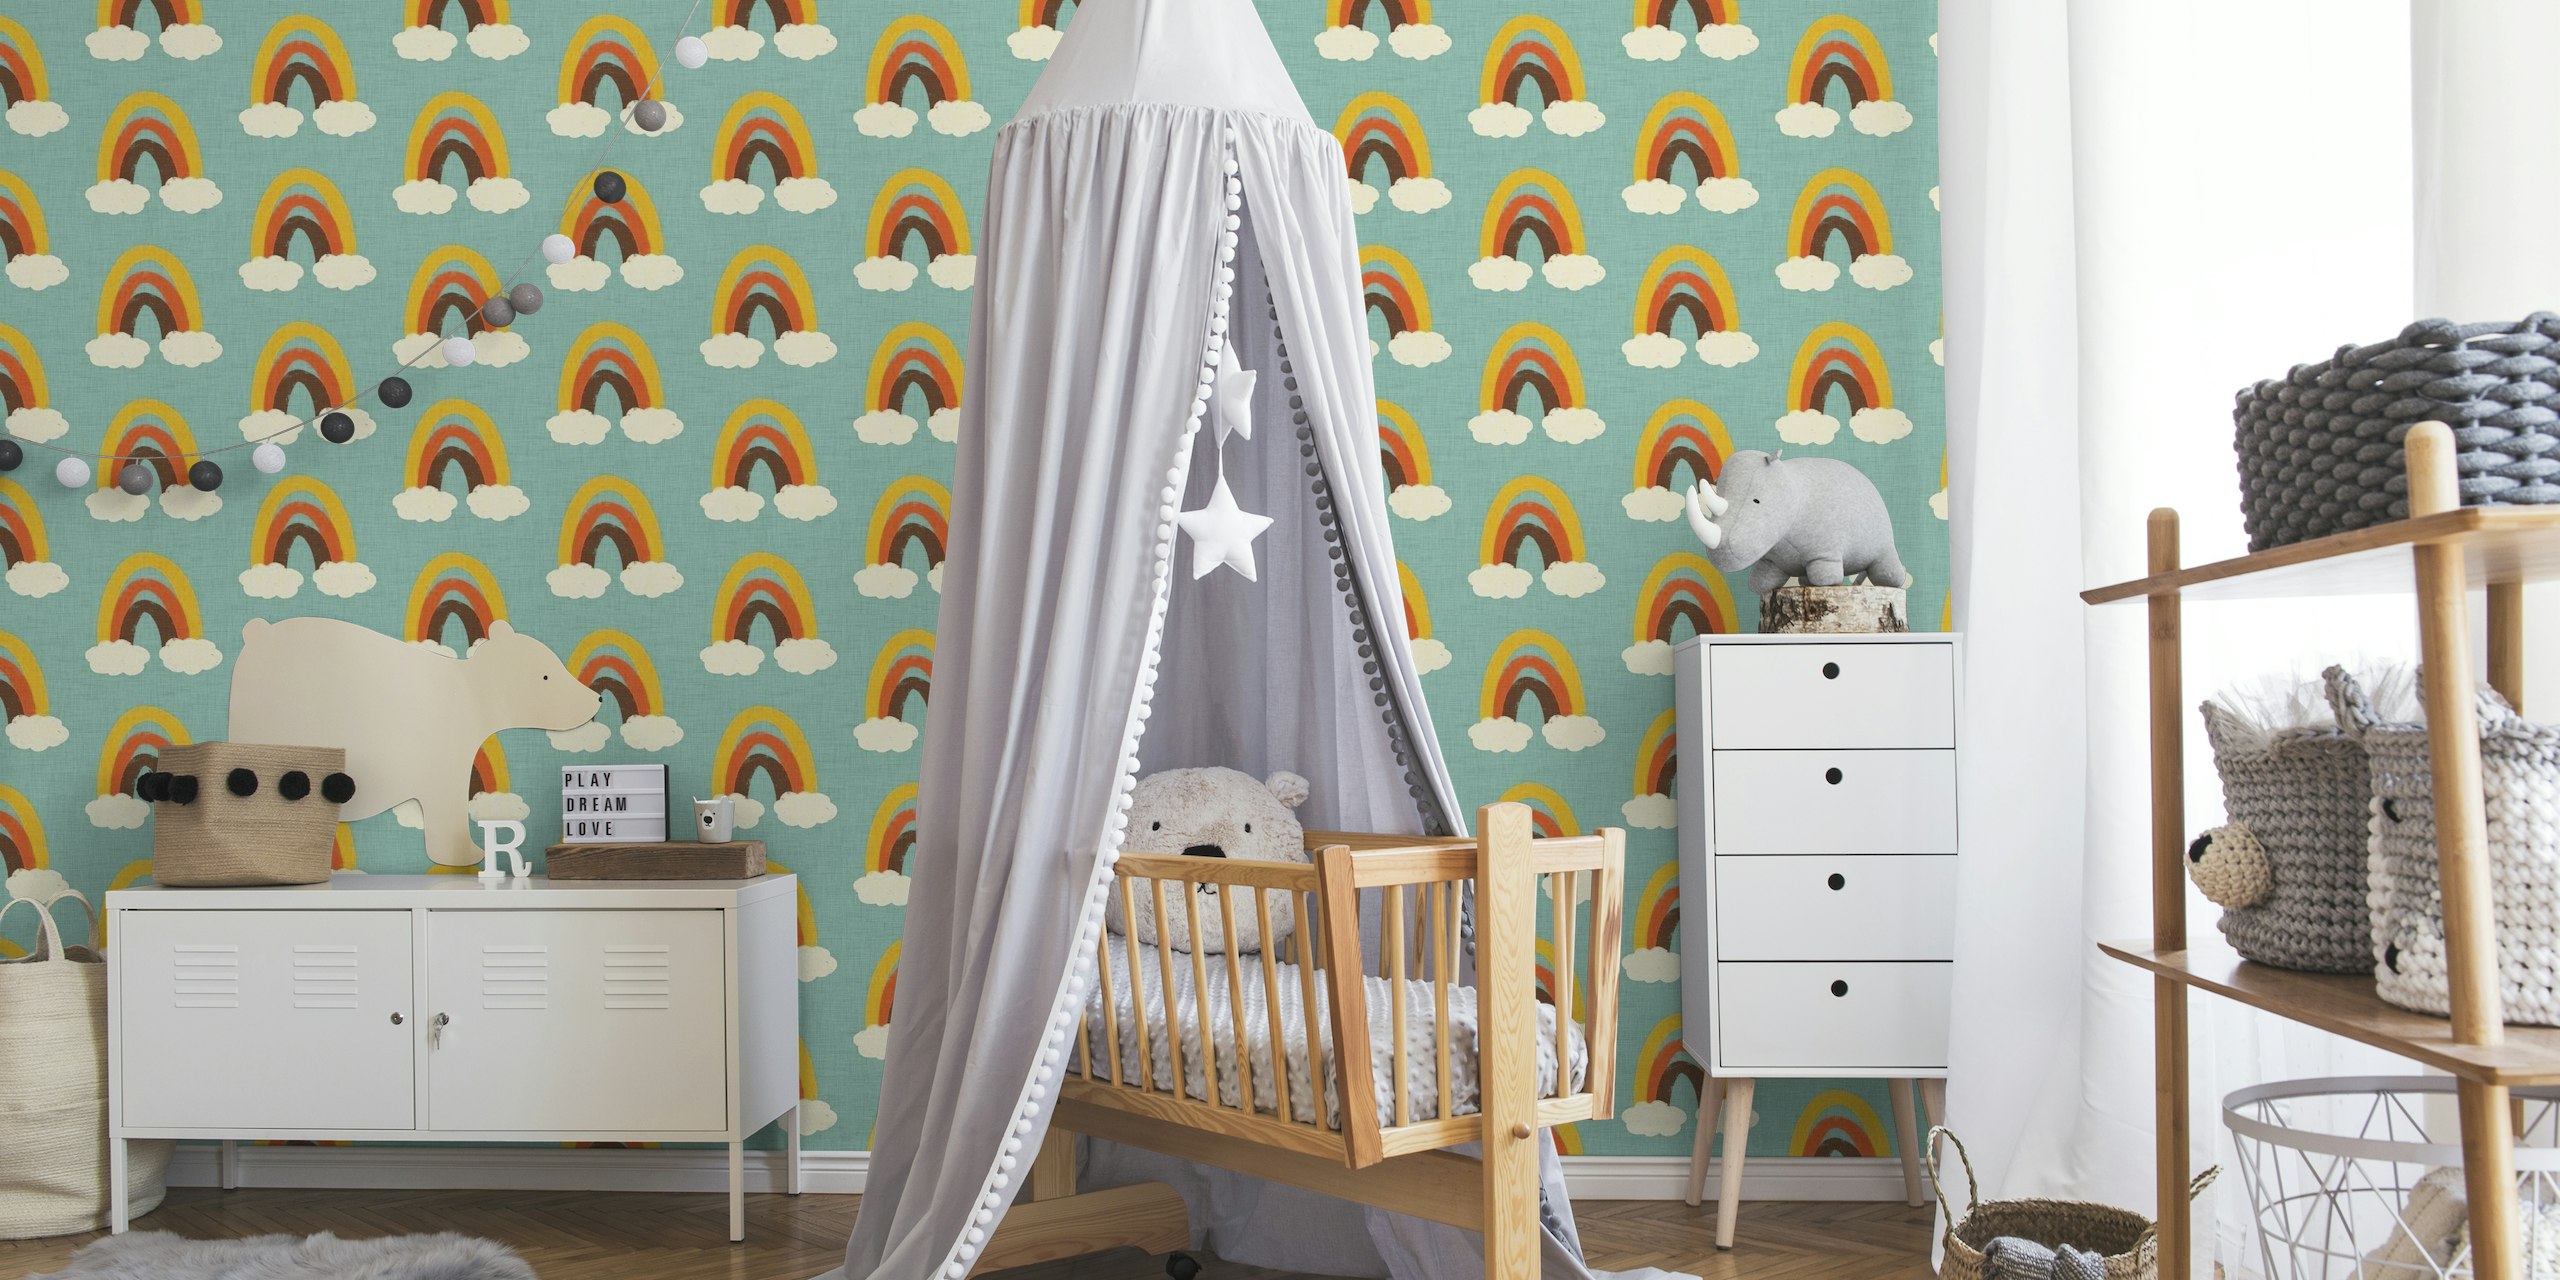 Groovy 70s Cute Rainbow with clouds Blue behang